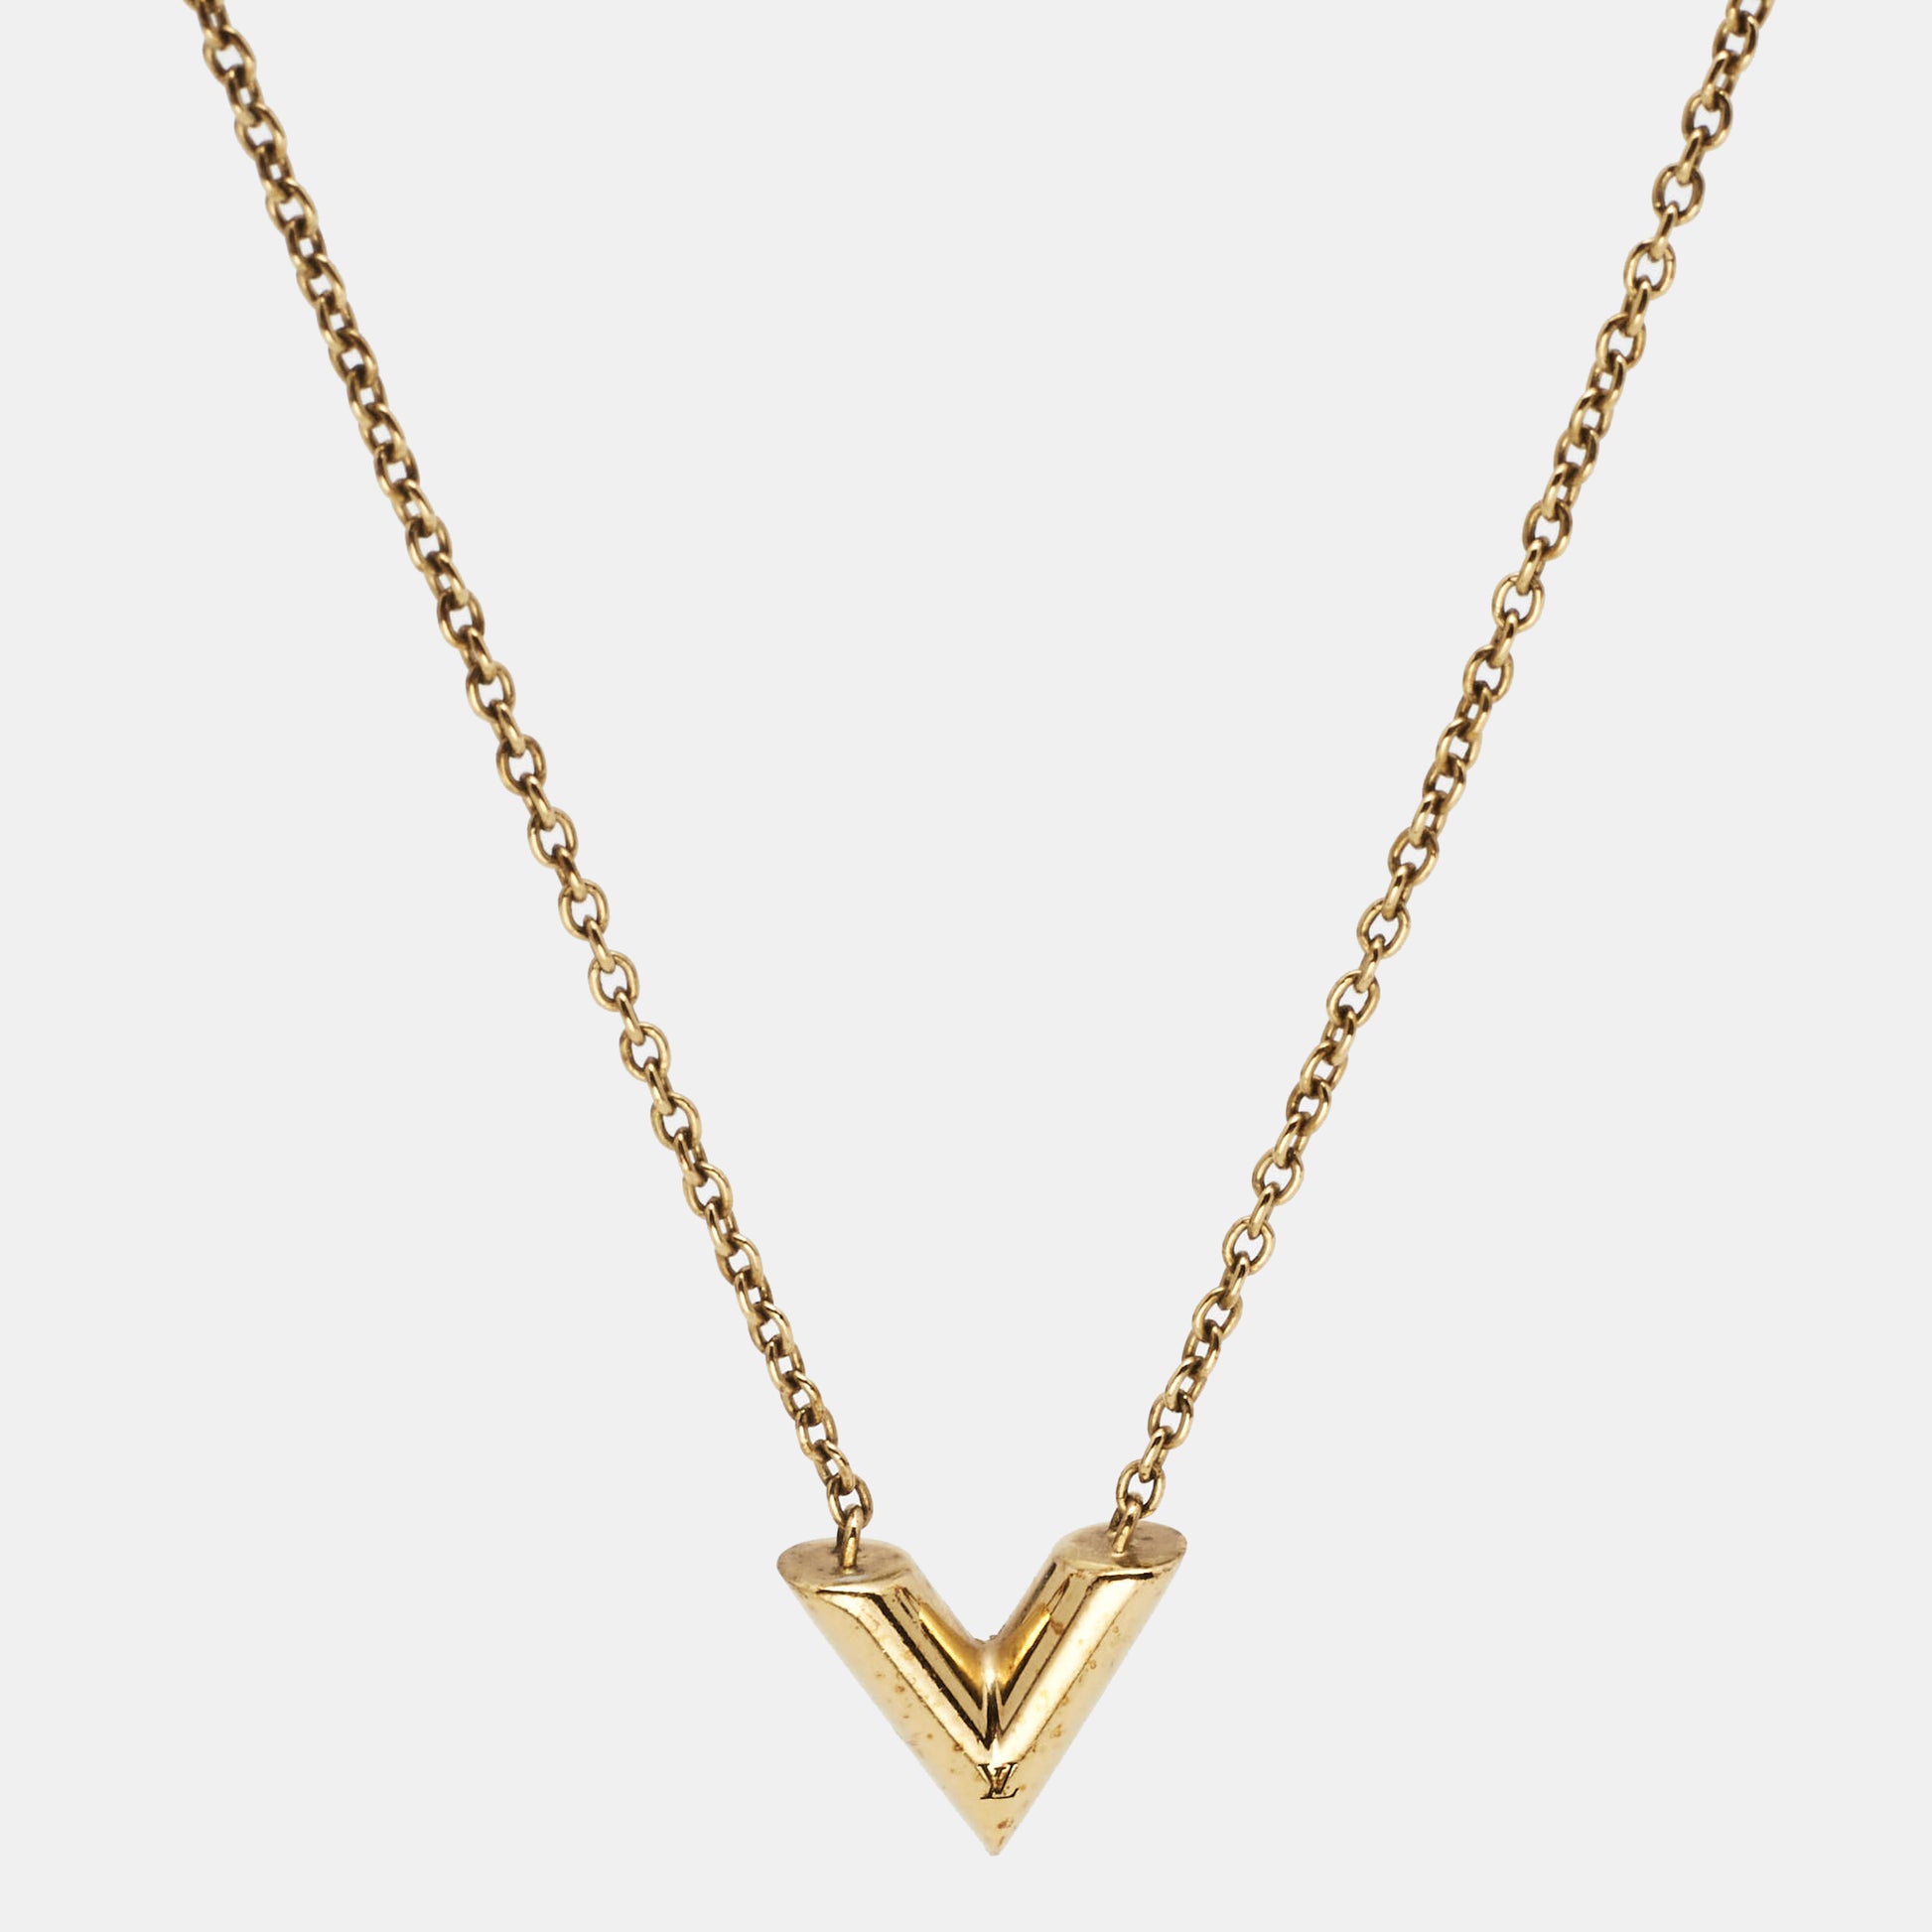 Louis Vuitton Louis Vuitton ESSENTIAL V NECKLACE  Necklace, Women  accessories jewelry, Accessories jewelry necklace